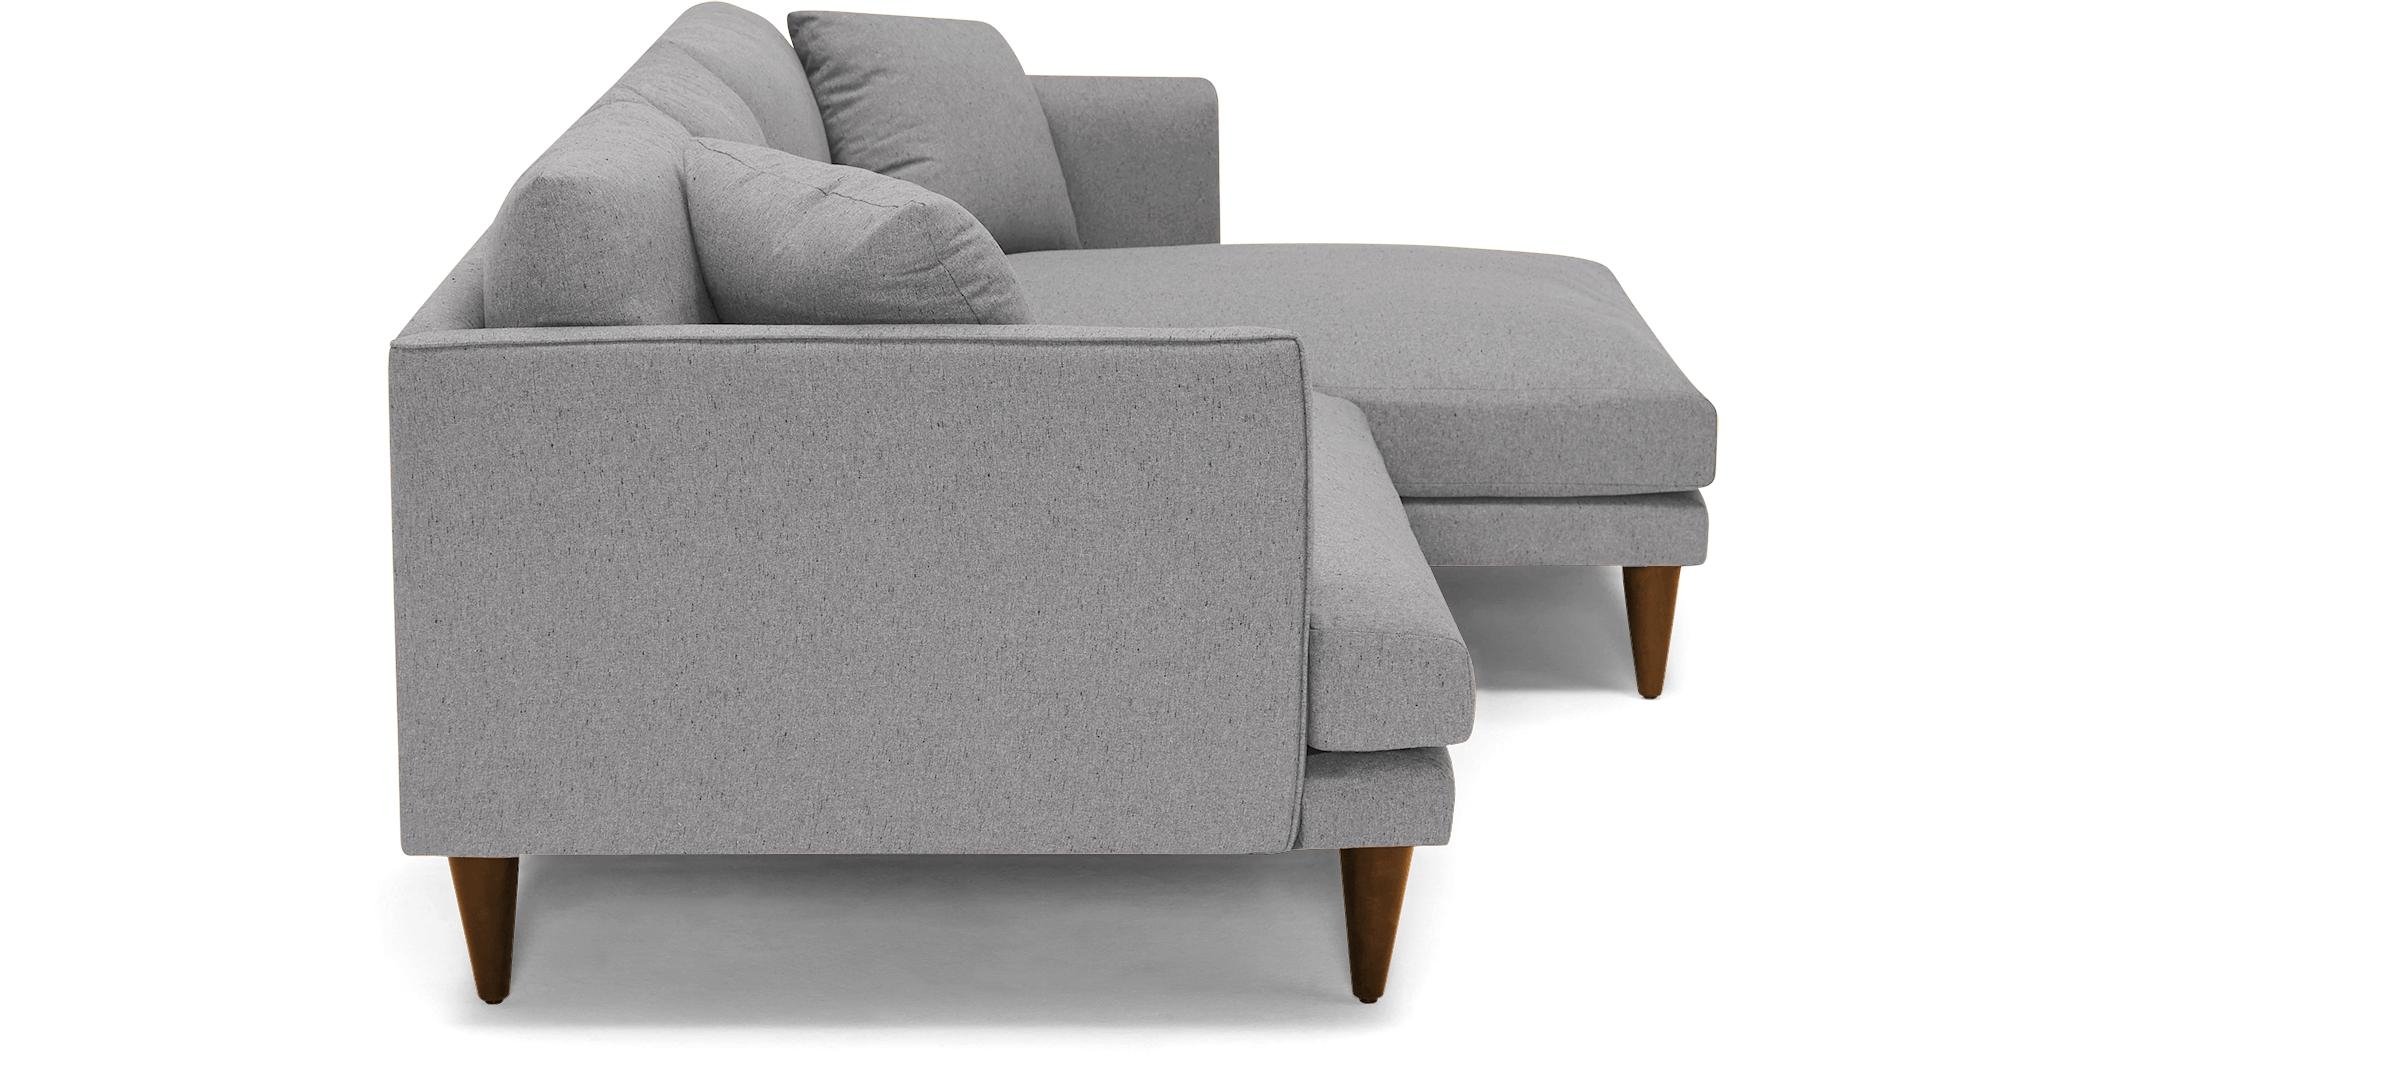 Gray Lewis Mid Century Modern Sectional - Royale Ash - Mocha - Left - Cone - Image 2